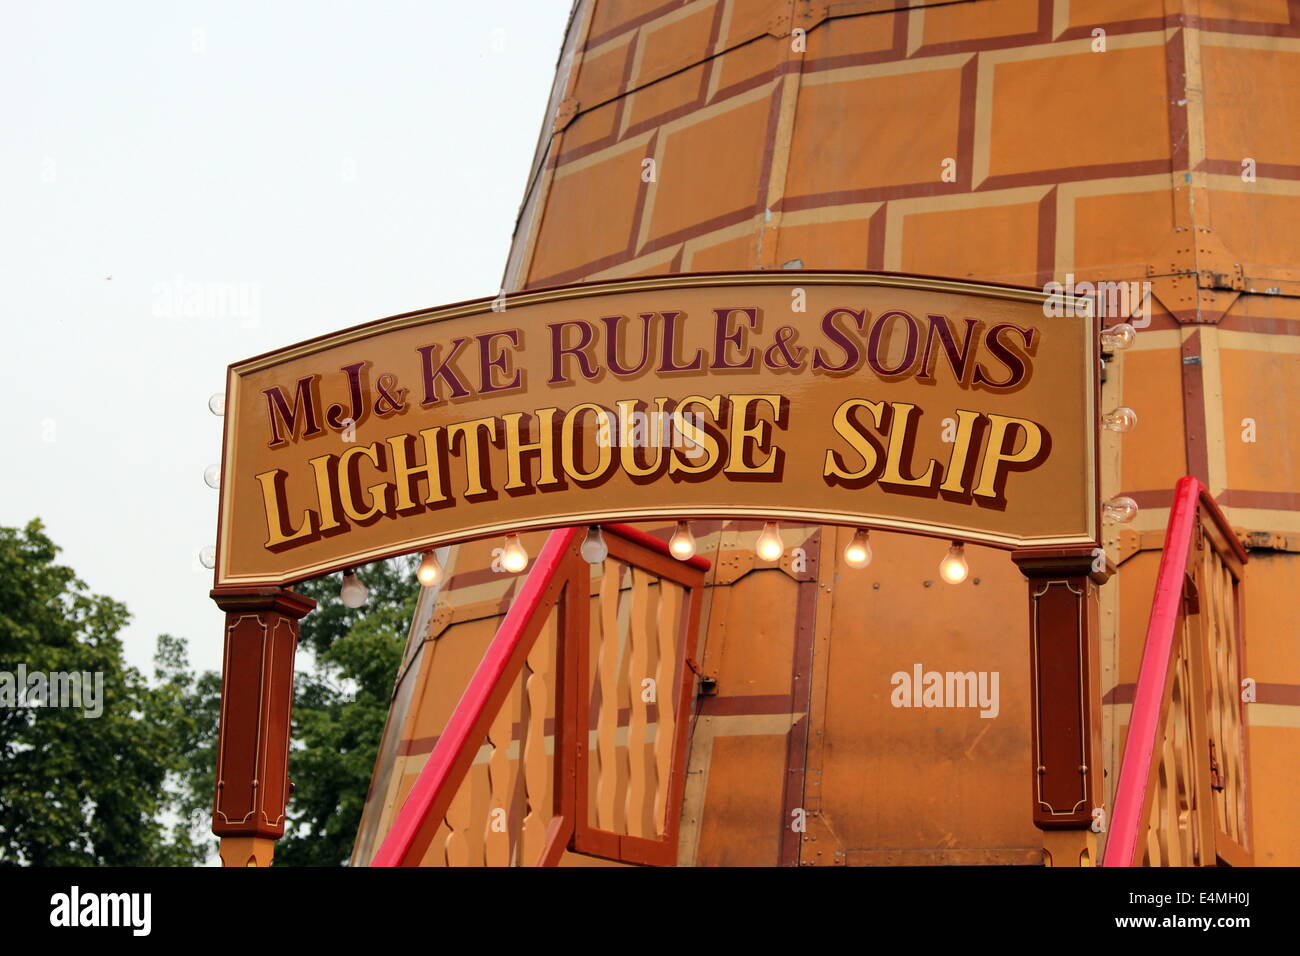 Helter Skelter fairground ride caleed Lighthouse Slip run by MJ and  KE Rule and Sons. Stock Photo